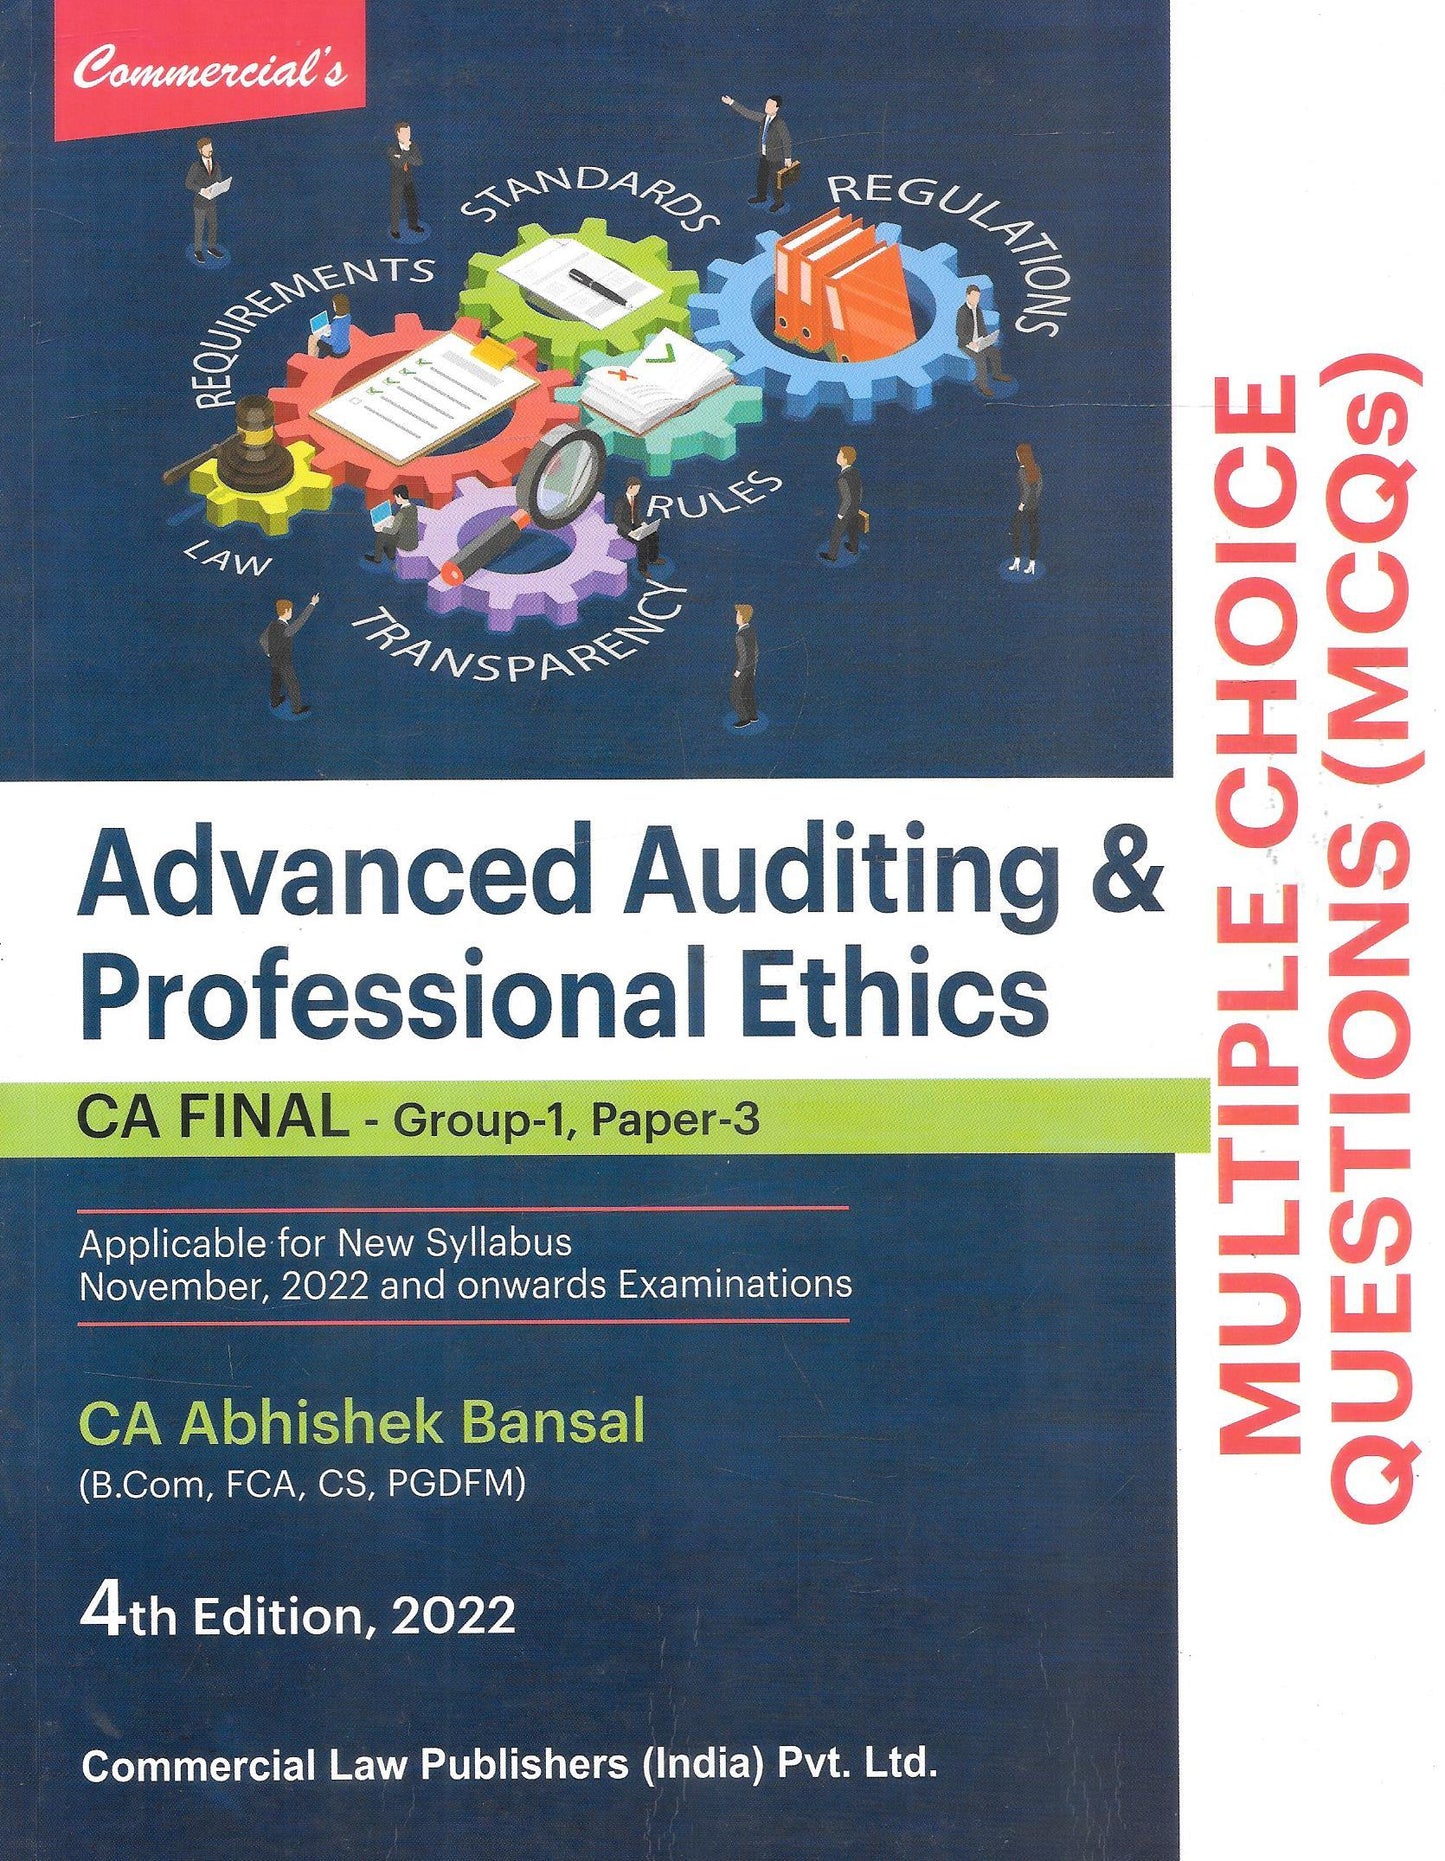 Advanced Auditing & Professional Ethics - MCQ - CA Final - Group-1, Paper-3